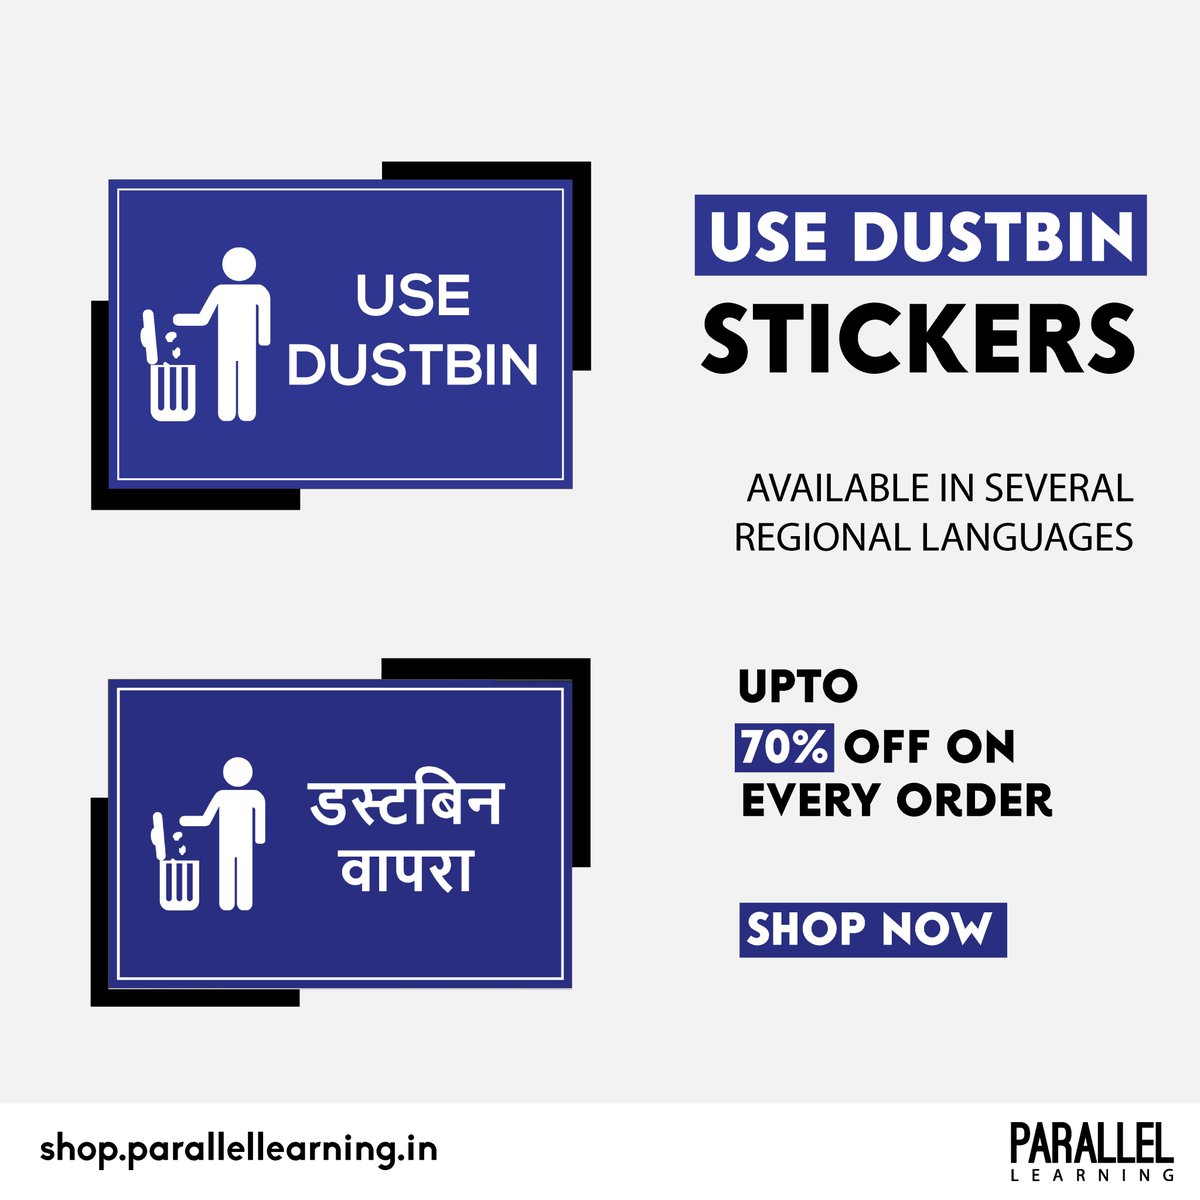 Easy to use, easy to install 'USE DUSTBIN' stickers 
Material - Eco Vinyl stickers with matte lamination suitable for indoor/outdoor use
.
.
shop.parallellearning.in/products/use-d…
#clean #usedustbin #dustbins #cleanup #cleanindia #cleaning #trash #generalsignage #ParallelLearning